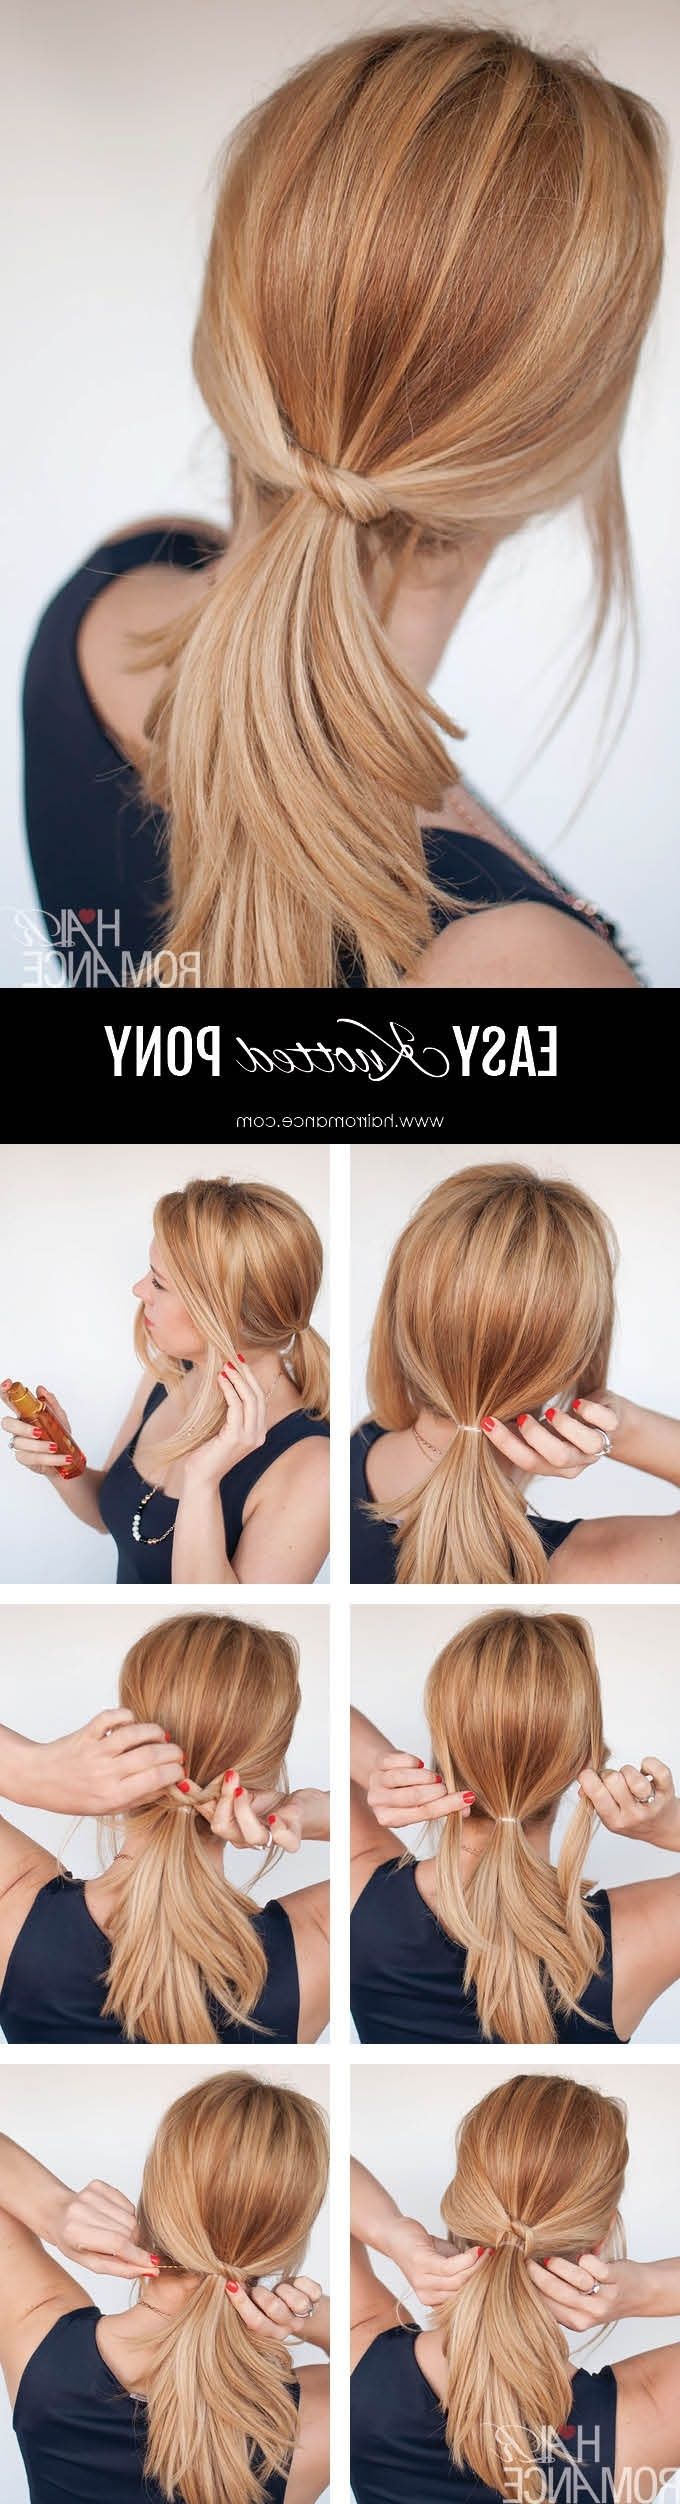 3 Chic Ponytail Tutorials To Lift Your Everyday Hair Game – Hair Romance Throughout Famous Romantic Half Pony Hairstyles (View 12 of 20)